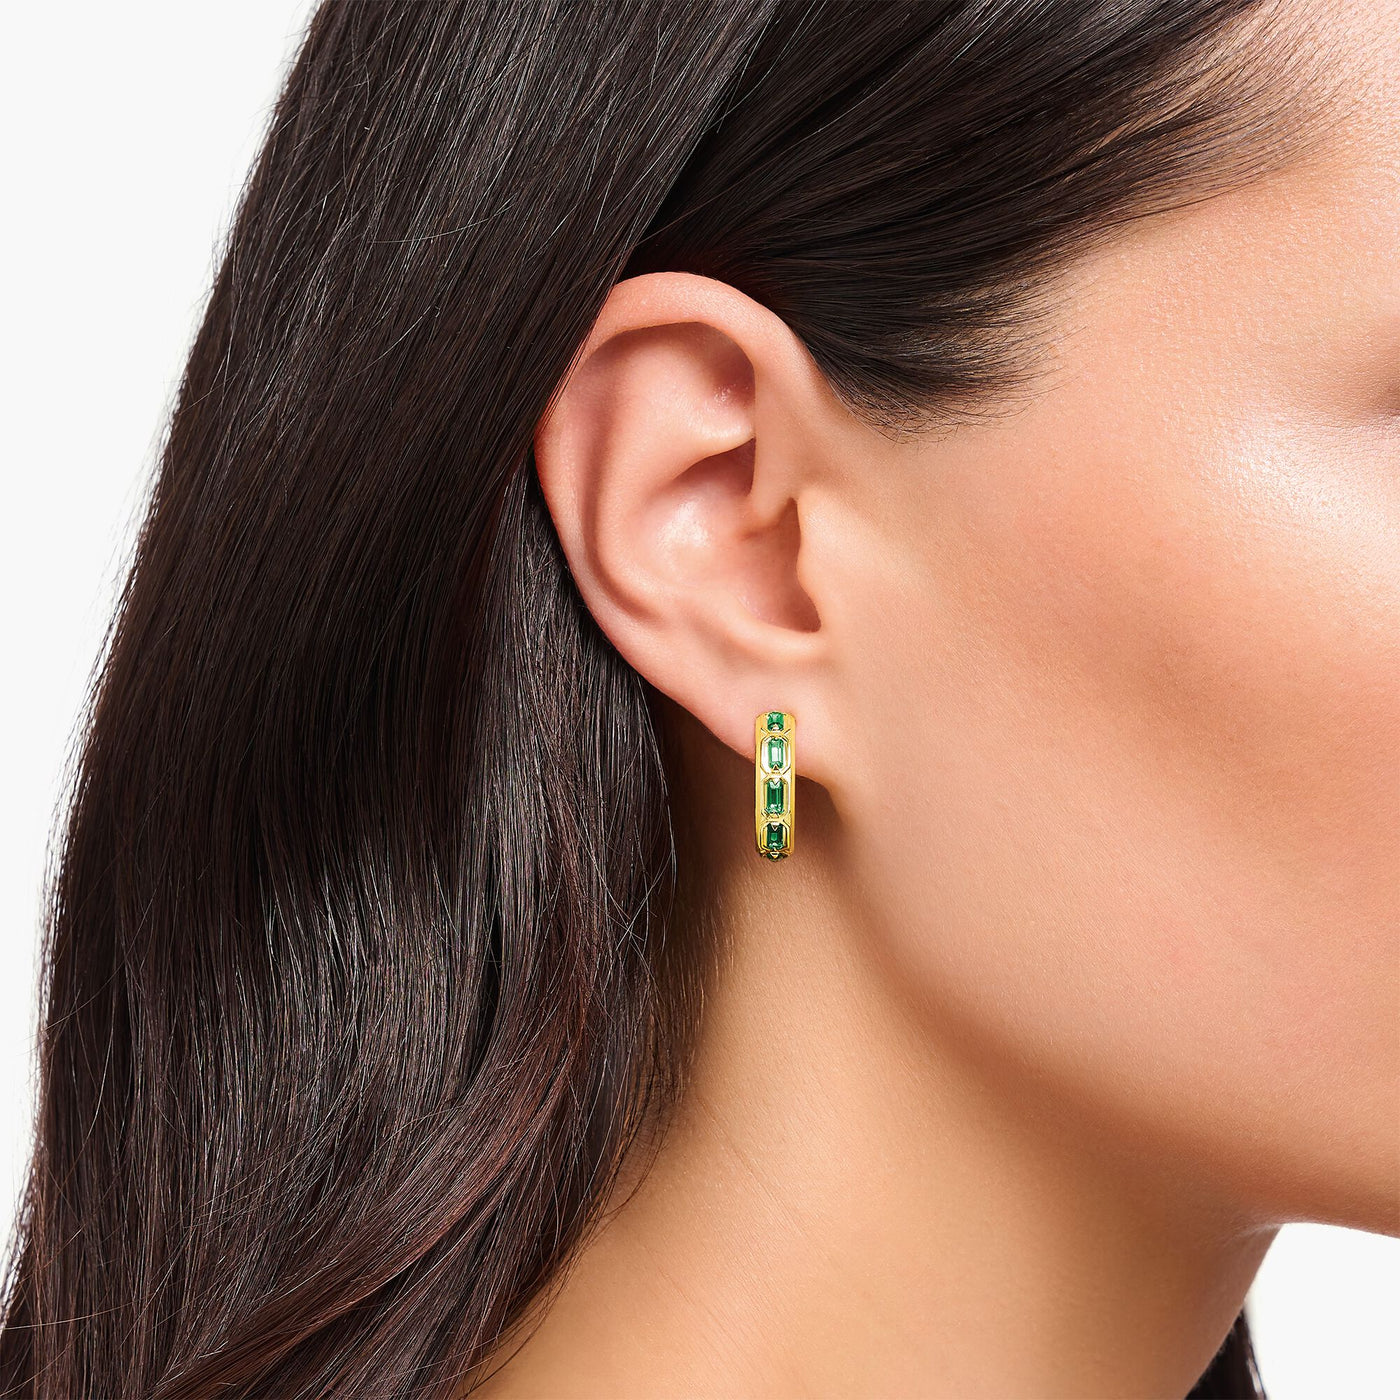 THOMAS SABO Gold Hoop Earrings with Green Stones